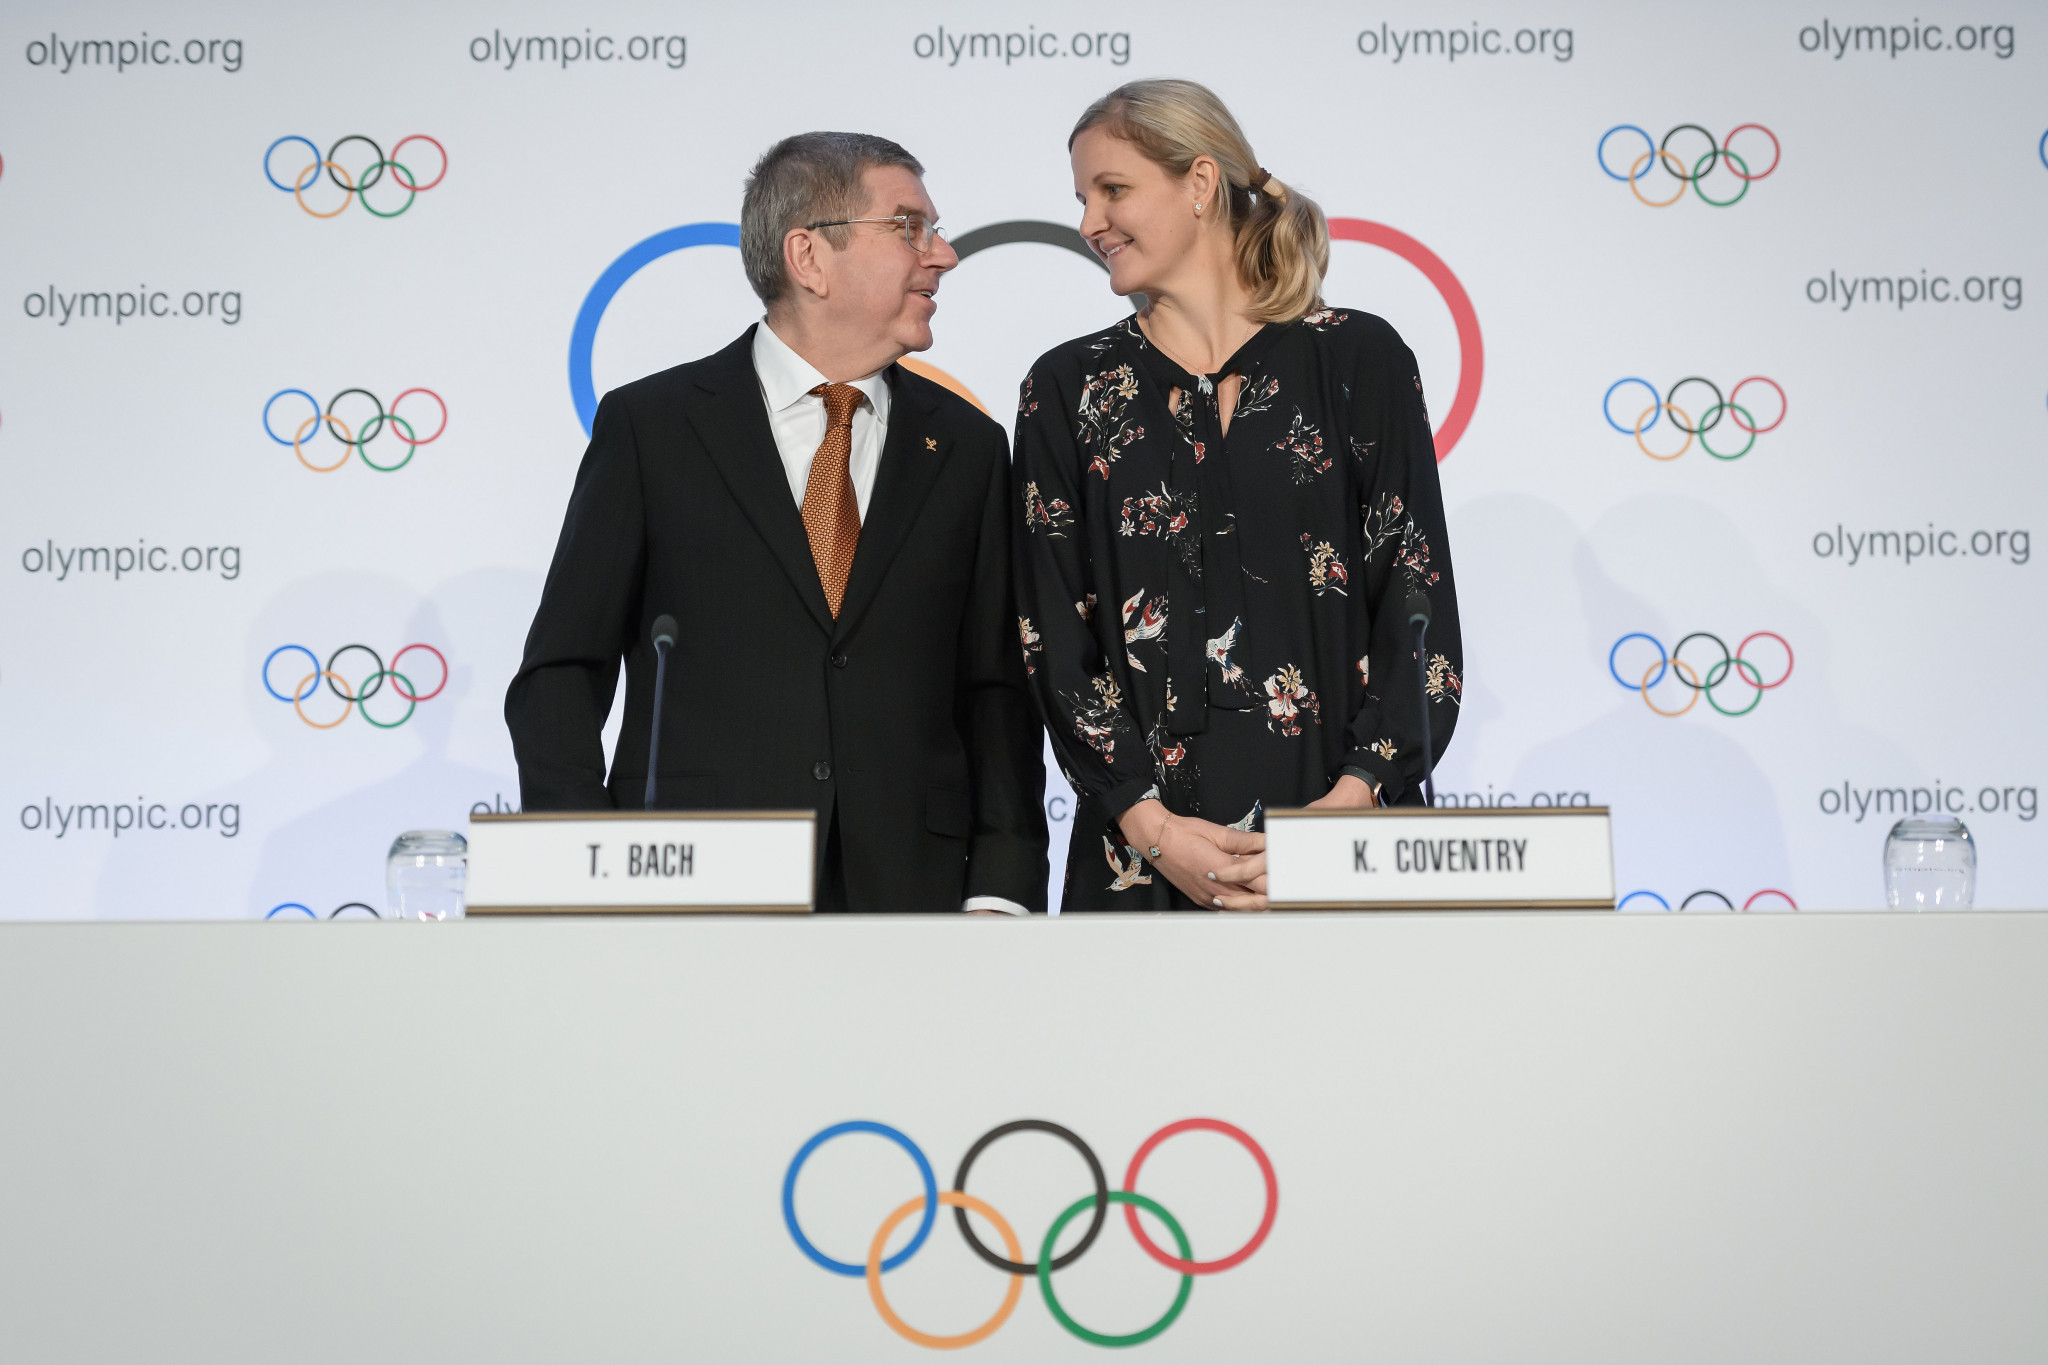 Kirsty Coventry, right, is widely believed to be the choice of Thomas Bach, left, to succeed him as IOC President, if he steps down in 2025 ©Getty Images